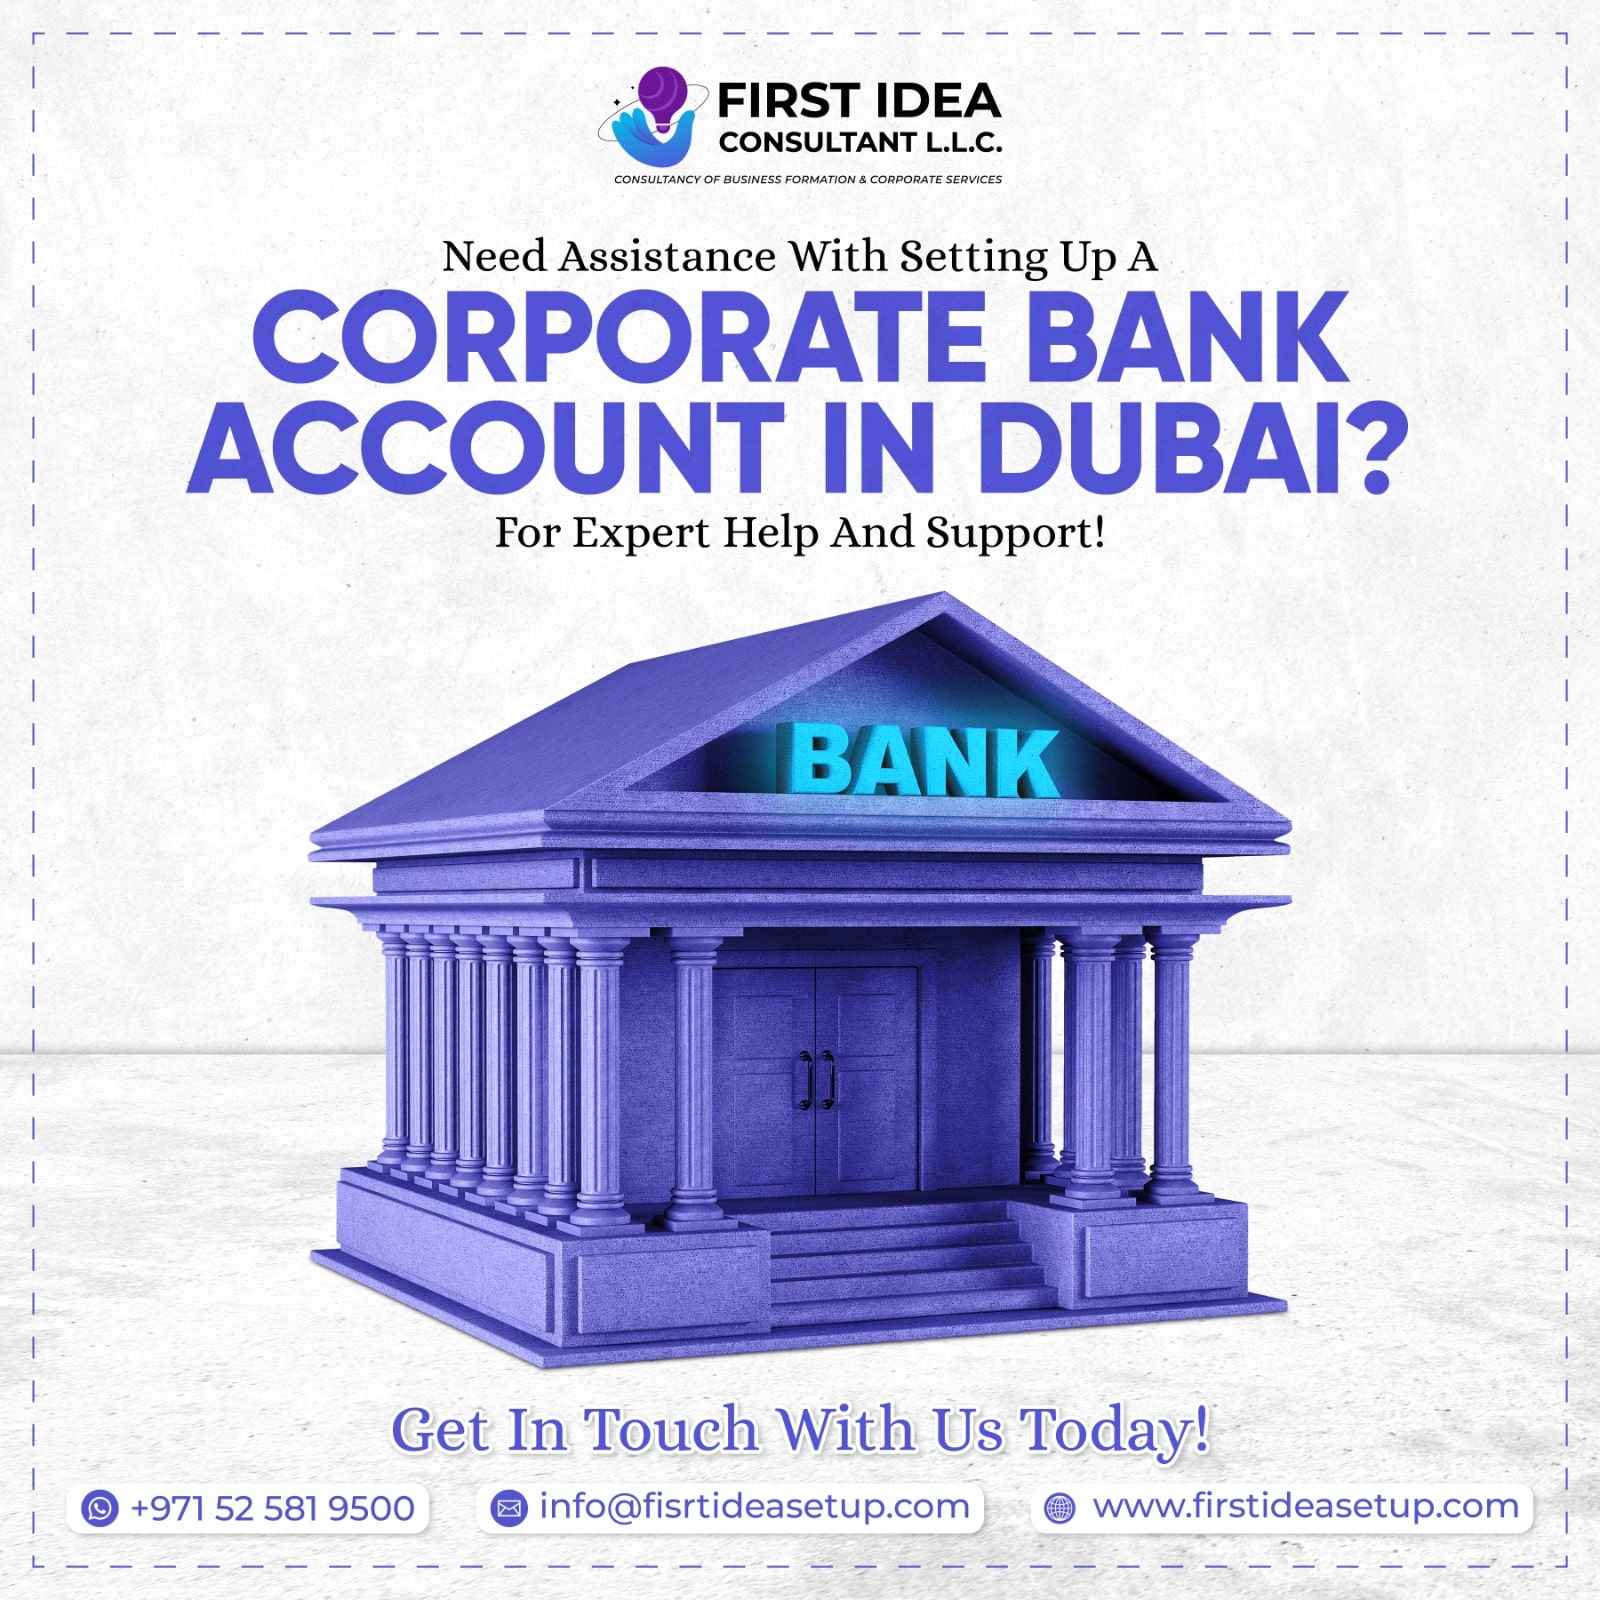 opening of business bank account, starting a bank account online, open company bank account, uae bank account opening, bank account opening in dubai, business bank account opening,